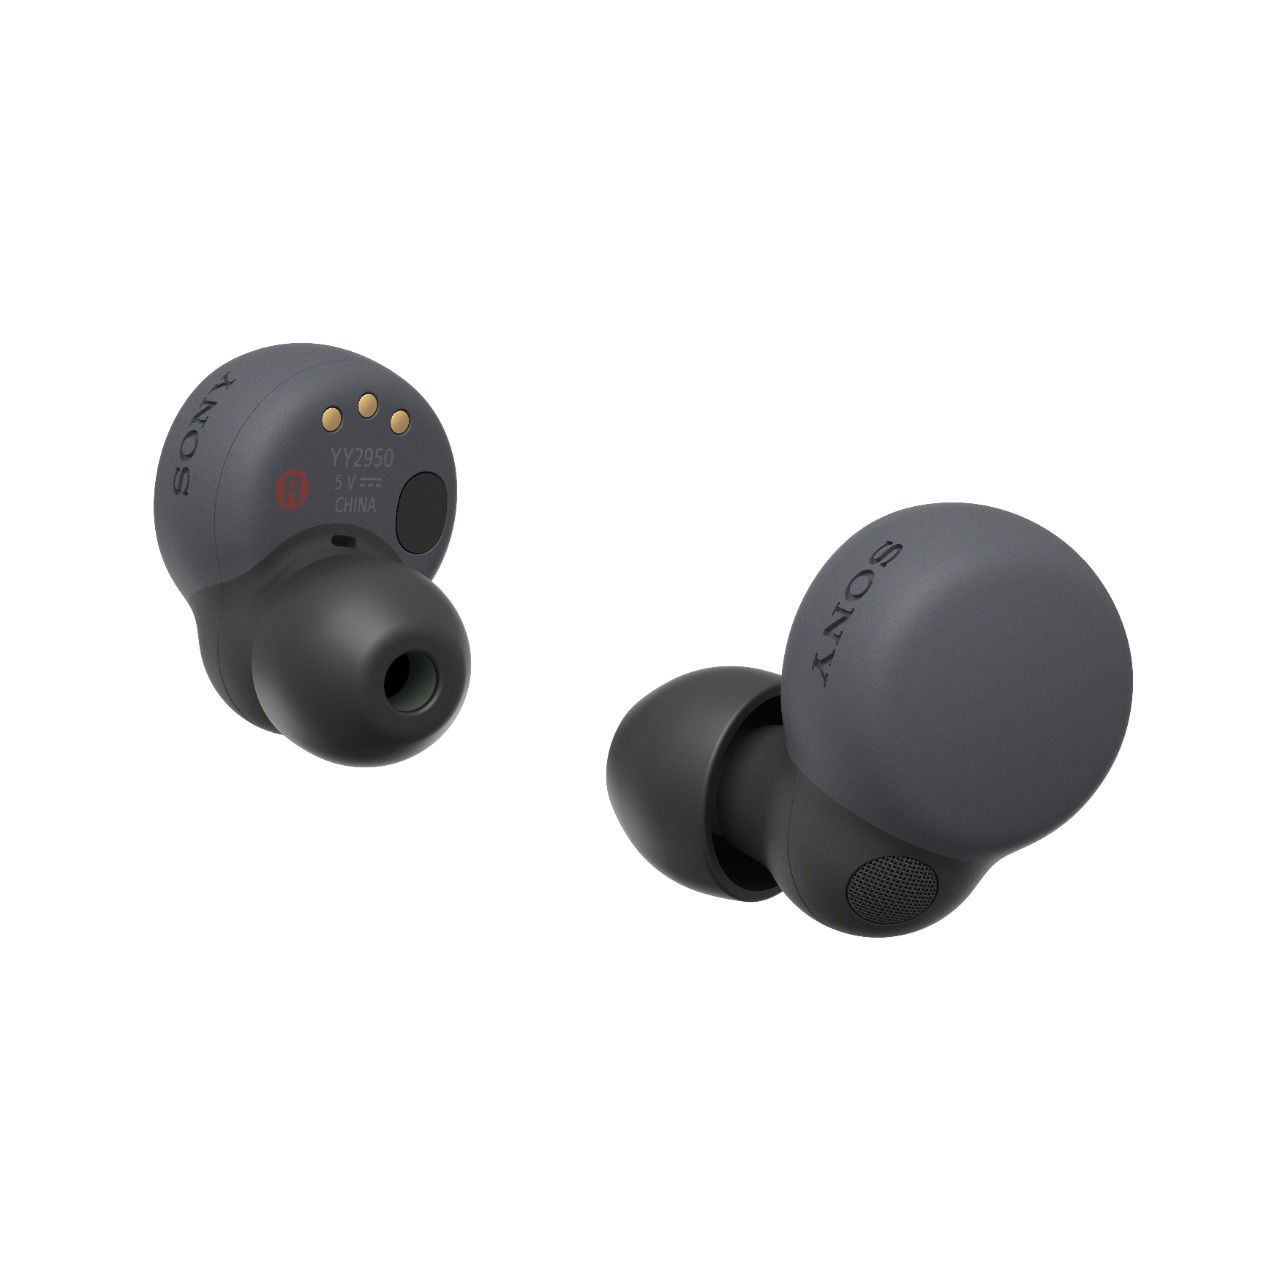 Sony Introduces New Revolutionary New Linkbuds S Headphones For LinkBuds |  Technology